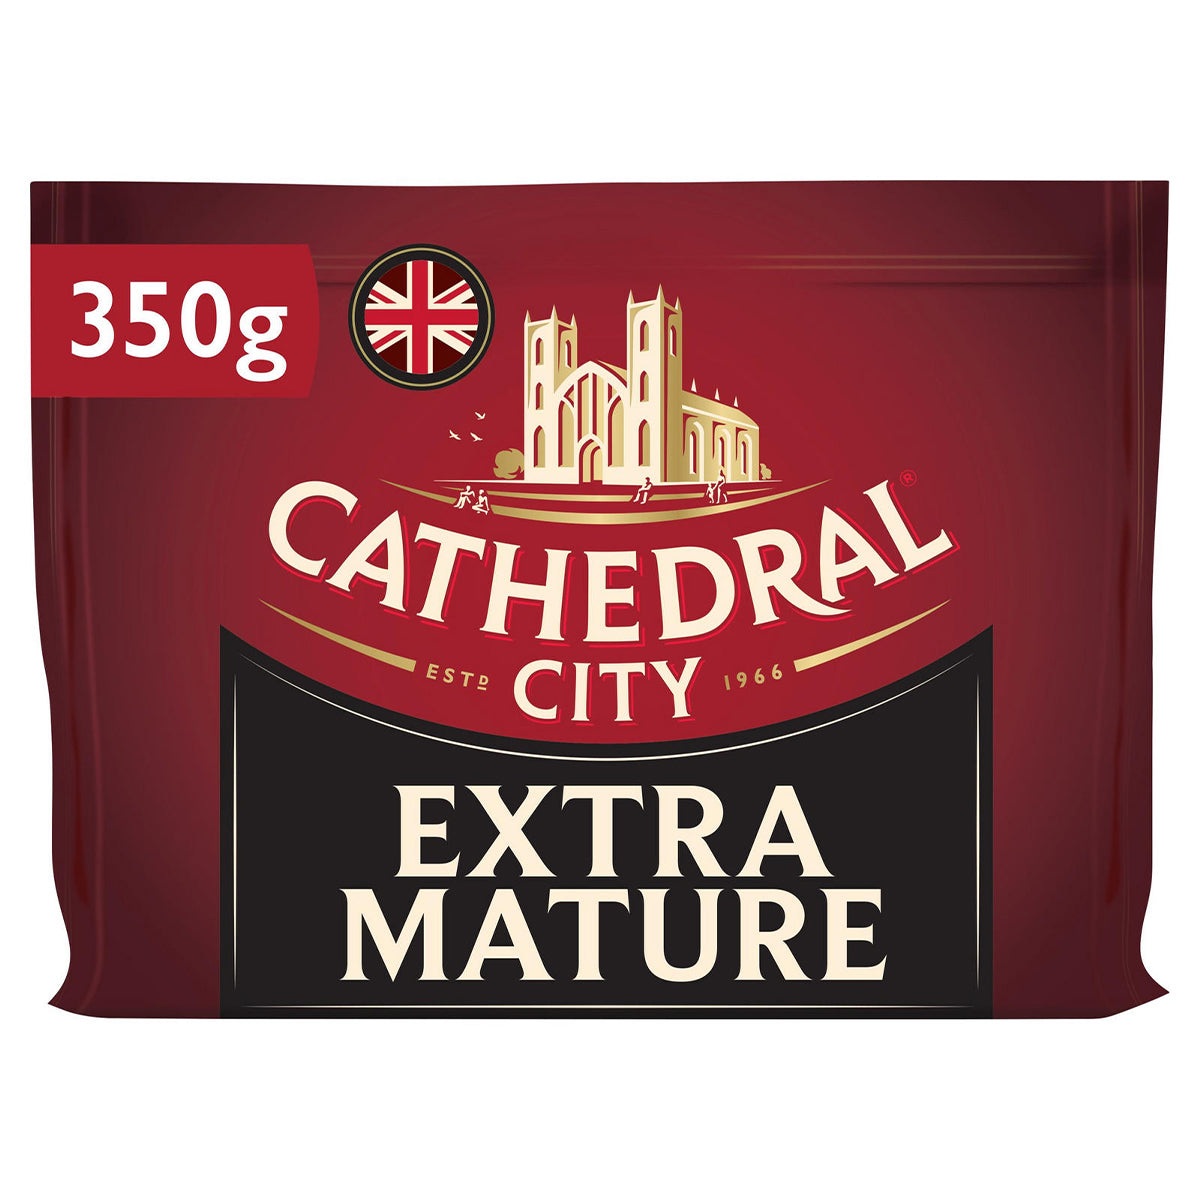 Cathedral City - Extra Mature Cheddar Cheese - 350g - Continental Food Store